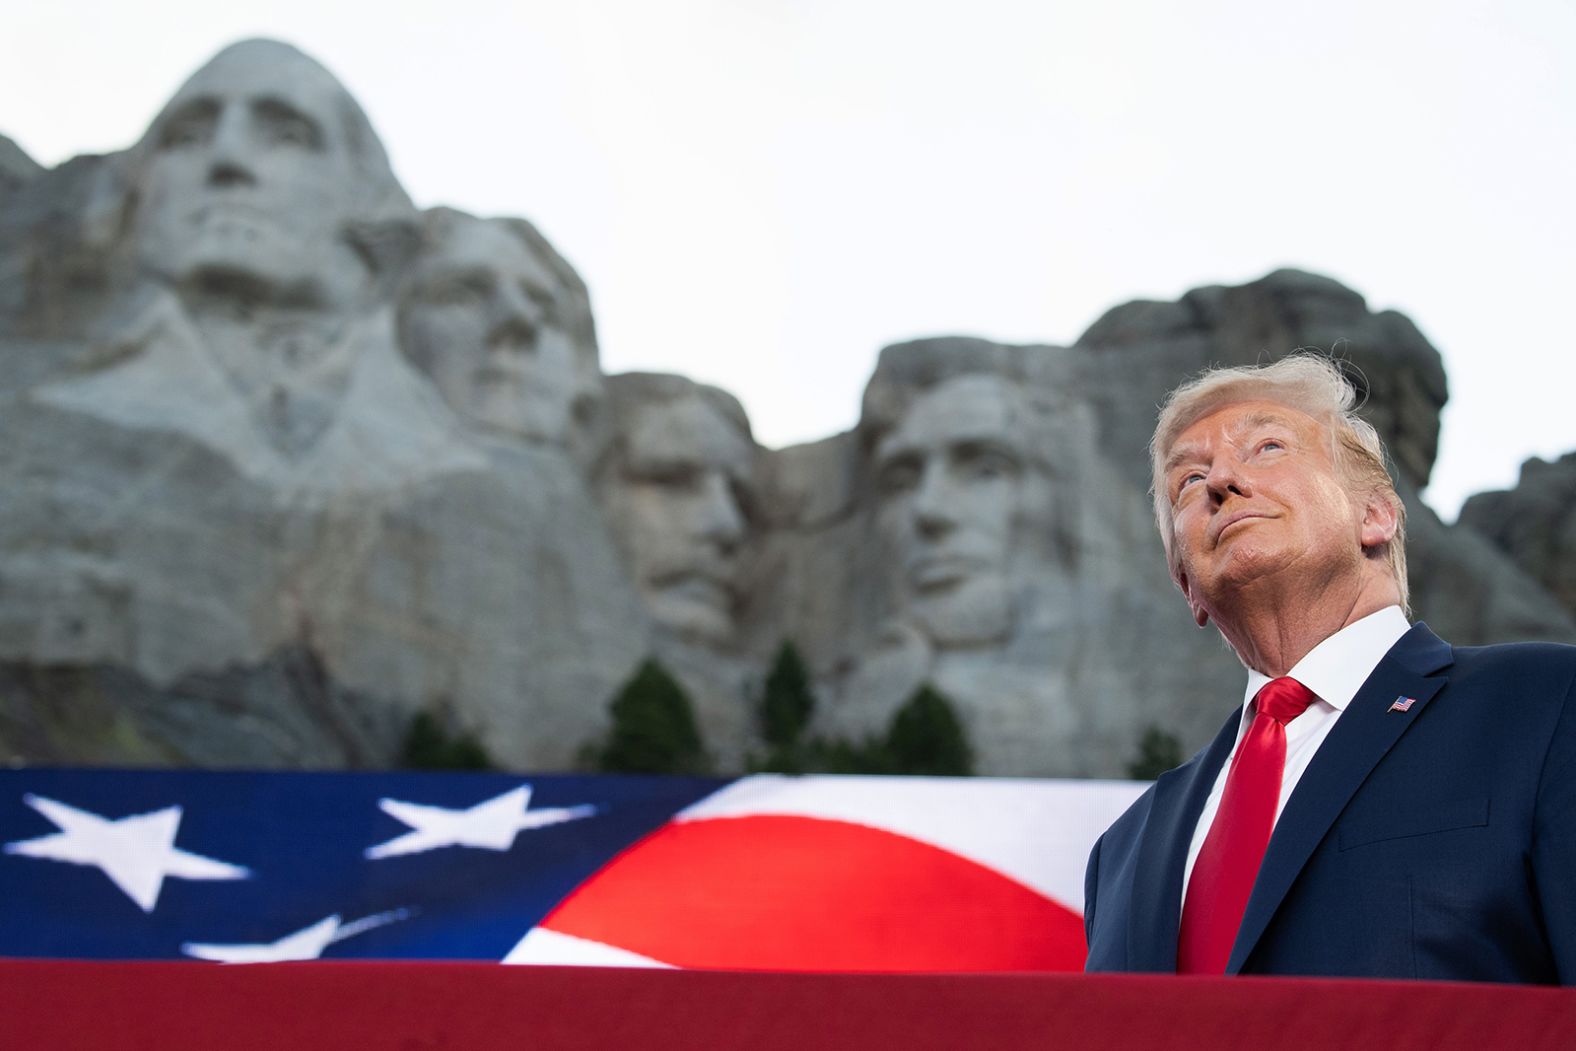 Trump arrives at Mount Rushmore for his <a href="index.php?page=&url=https%3A%2F%2Fwww.cnn.com%2F2020%2F07%2F03%2Fpolitics%2Ftrump-mount-rushmore-fireworks%2Findex.html" target="_blank">Independence Day celebration</a> in Keystone, South Dakota, in July 2020.